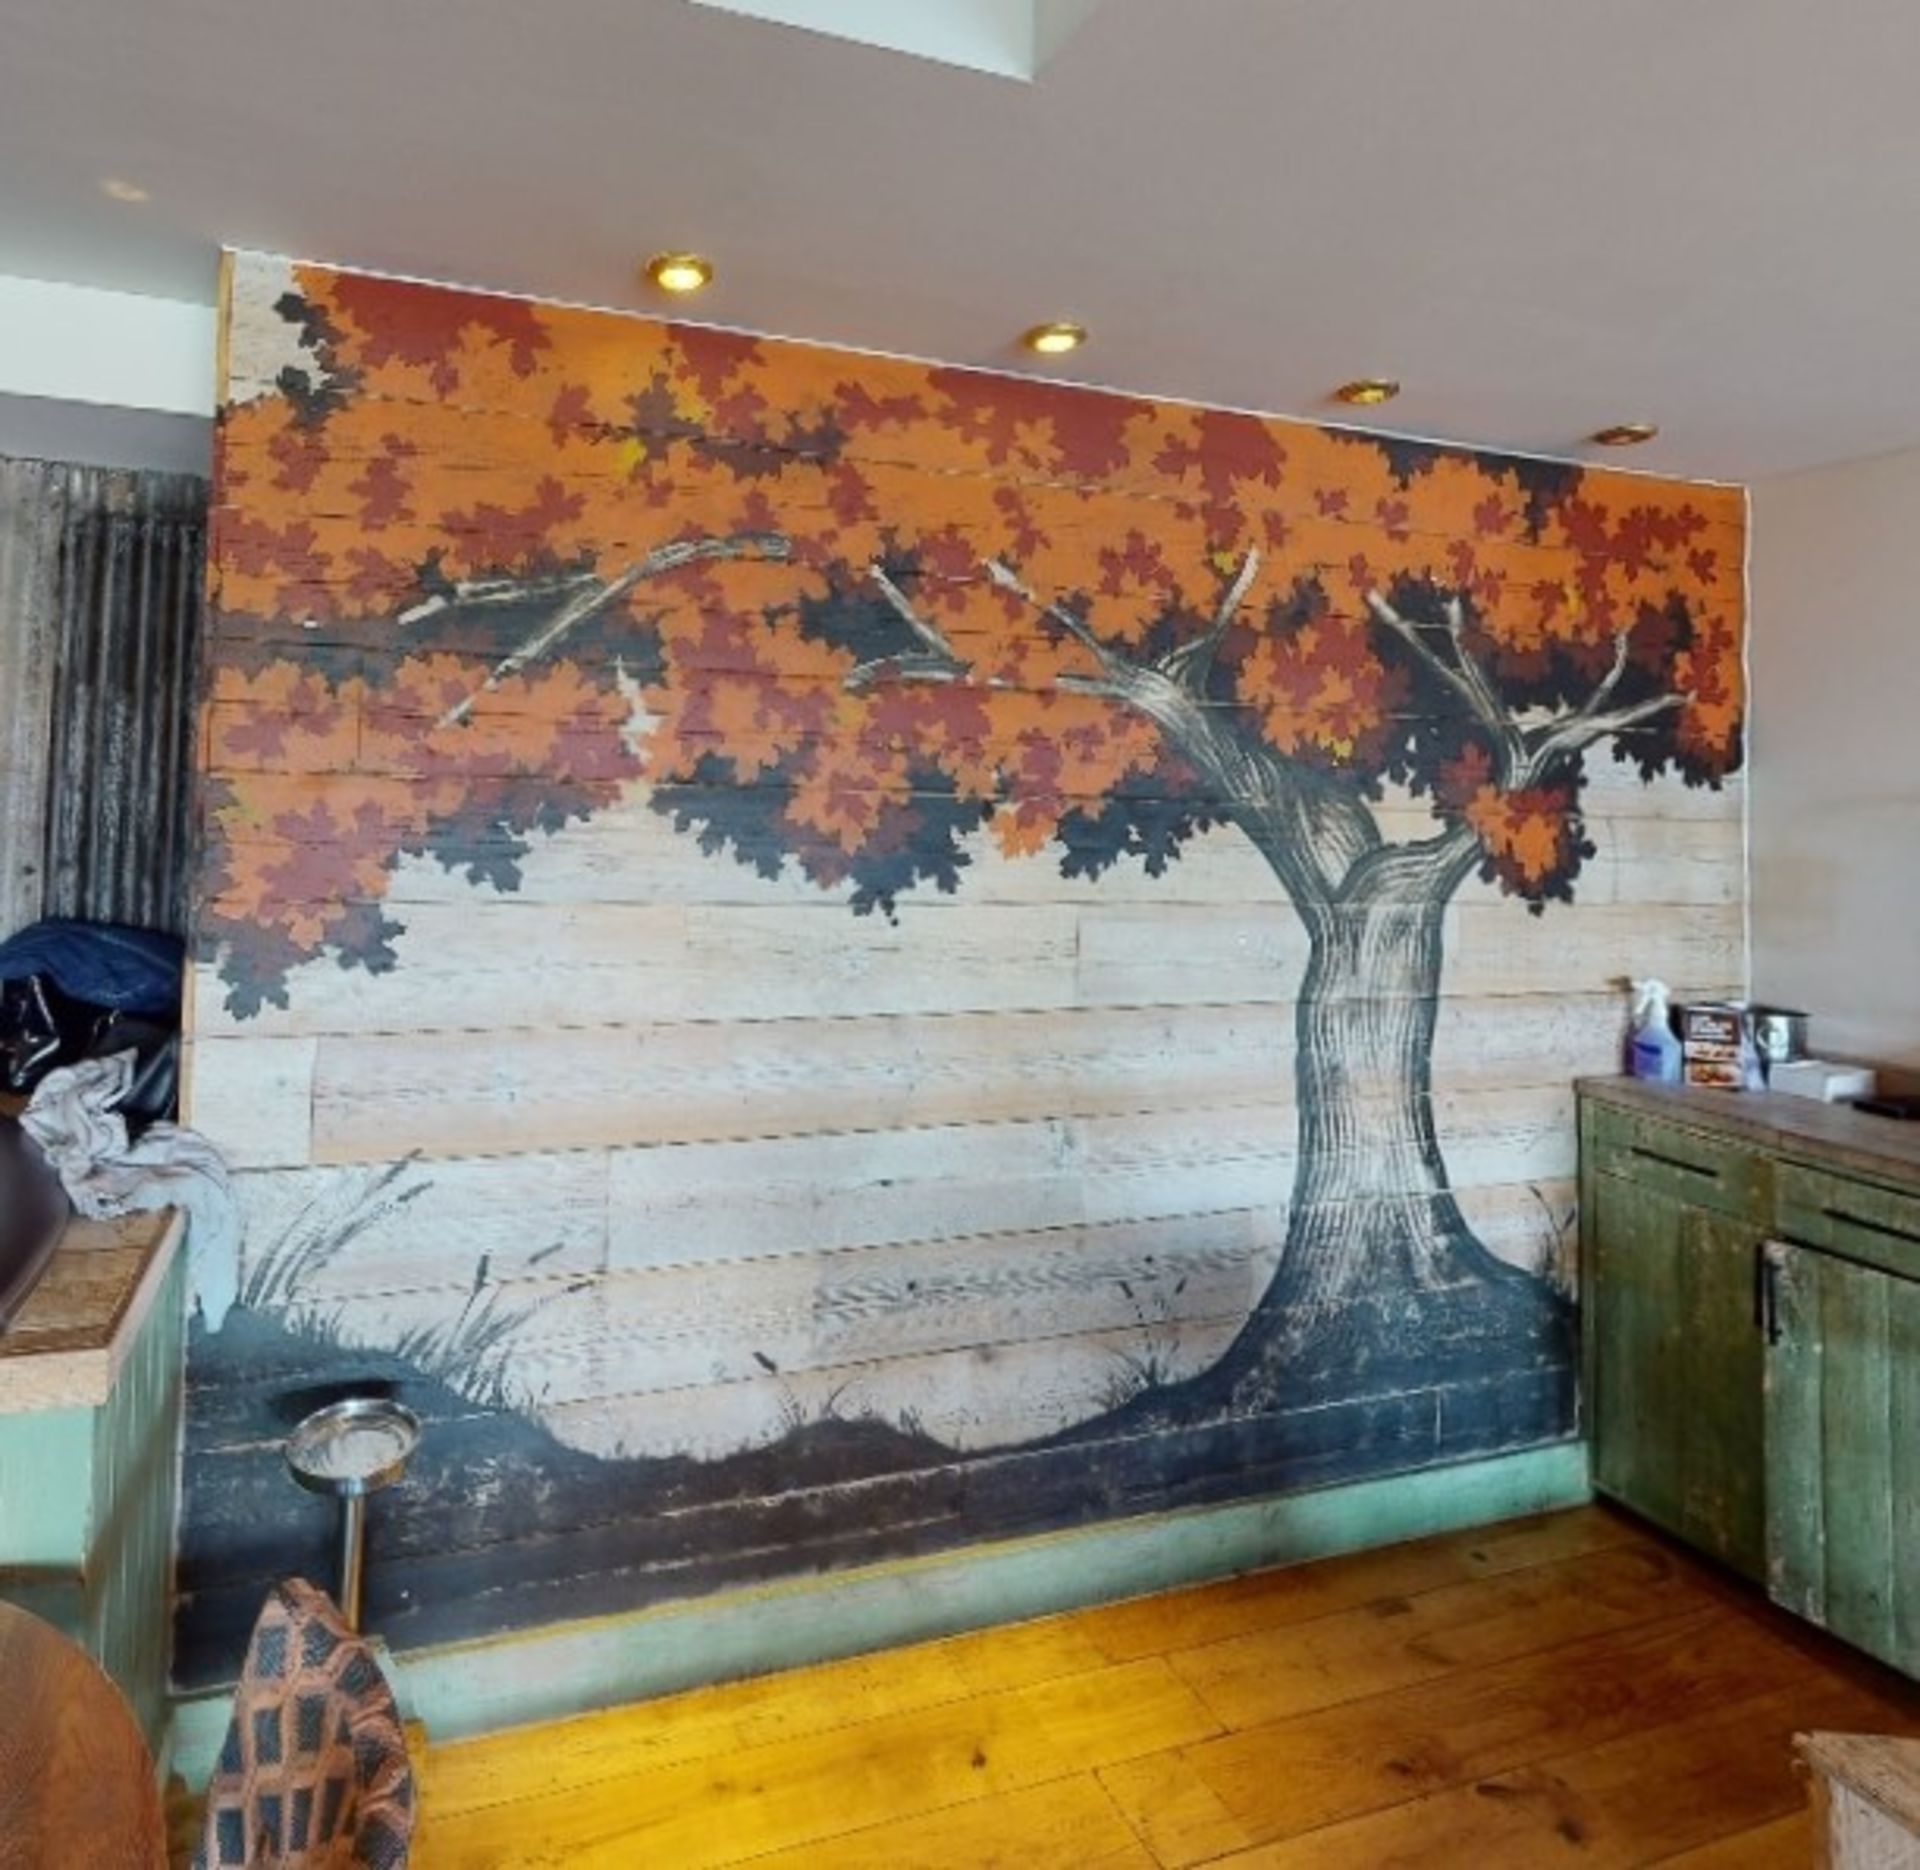 1 x Natural Wood Wall Covering Panels Featuring a Hand Painted Leafy Autumn Tree